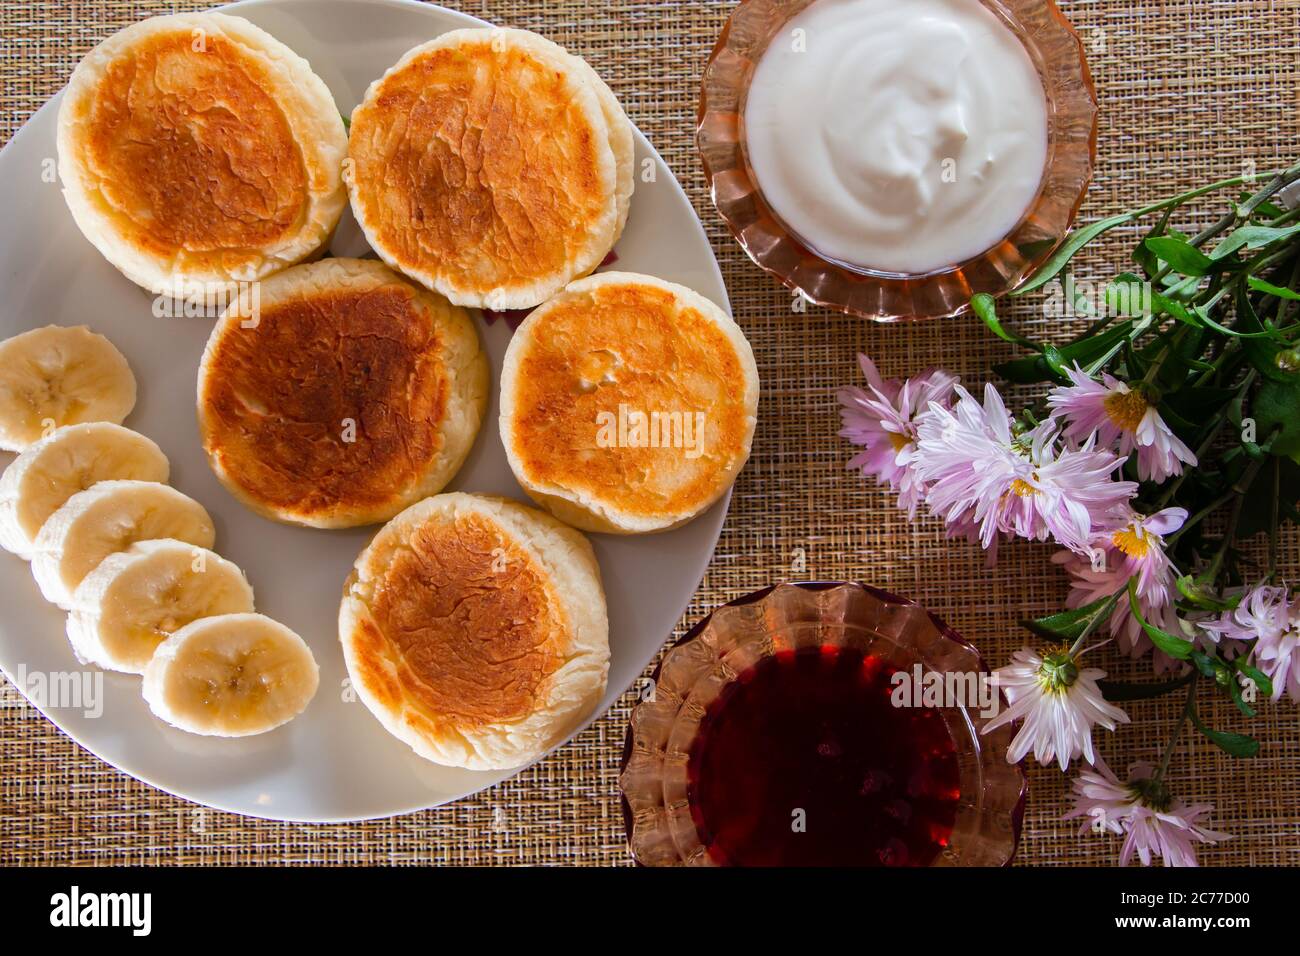 Homemade breakfast - delicious cottage cheese pancakes on a plate with jam and sour cream. Stock Photo